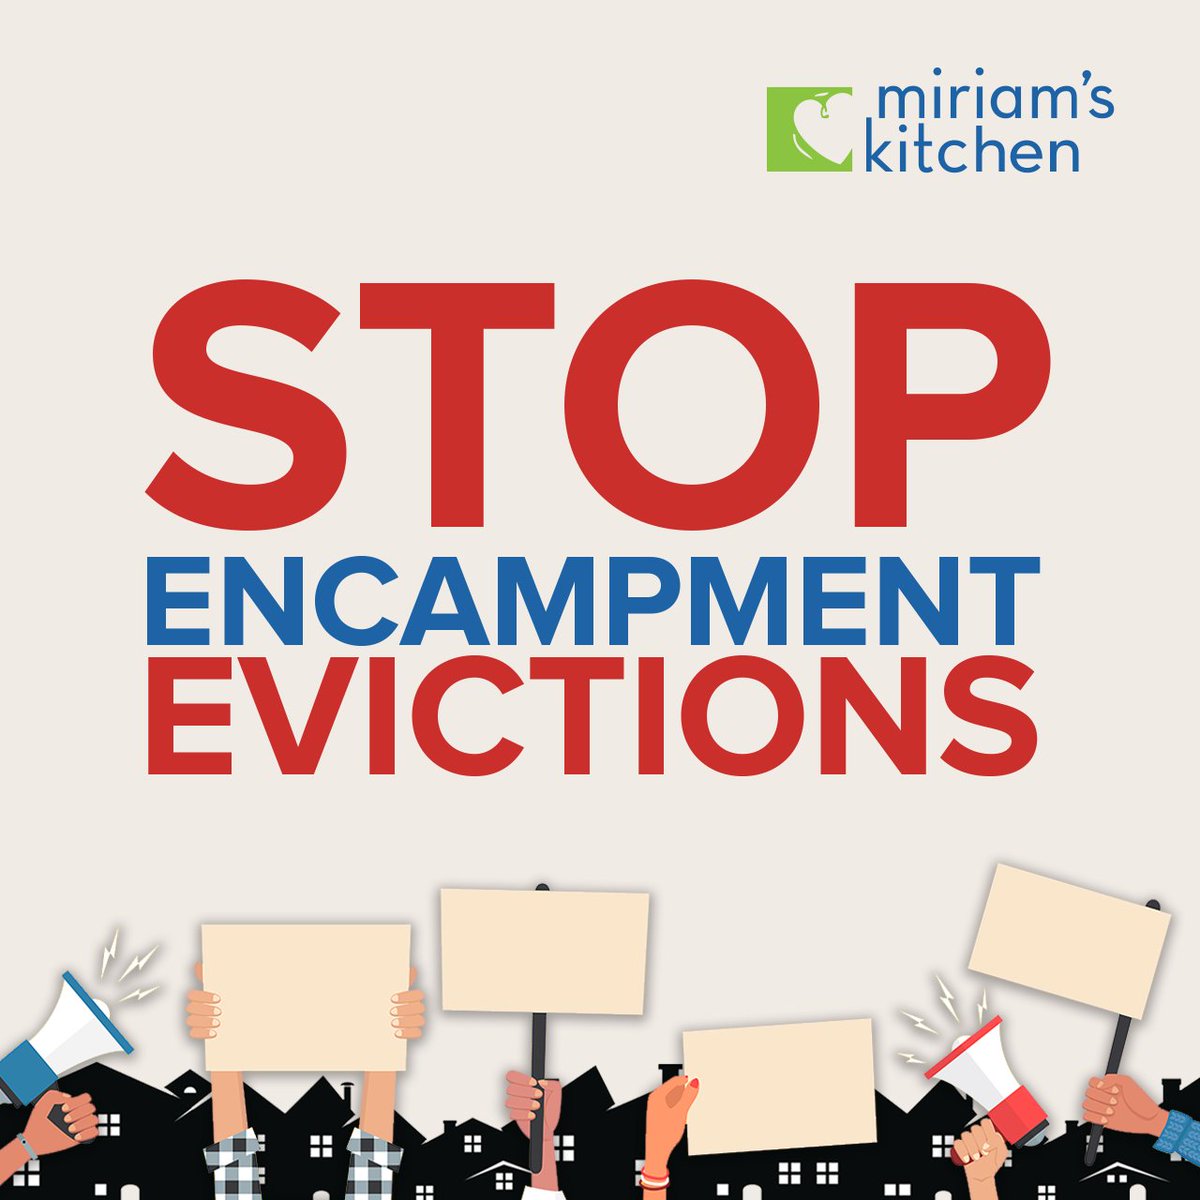 TAKE ACTION WITH MK! We join @thewayhomeDC in urging @NatlParkService and @MayorBowser's administration to halt the planned eviction of five encampment sites in Foggy Bottom, which will displace up to 70 people. Join us in messaging policymakers today: bit.ly/3y6MQuG